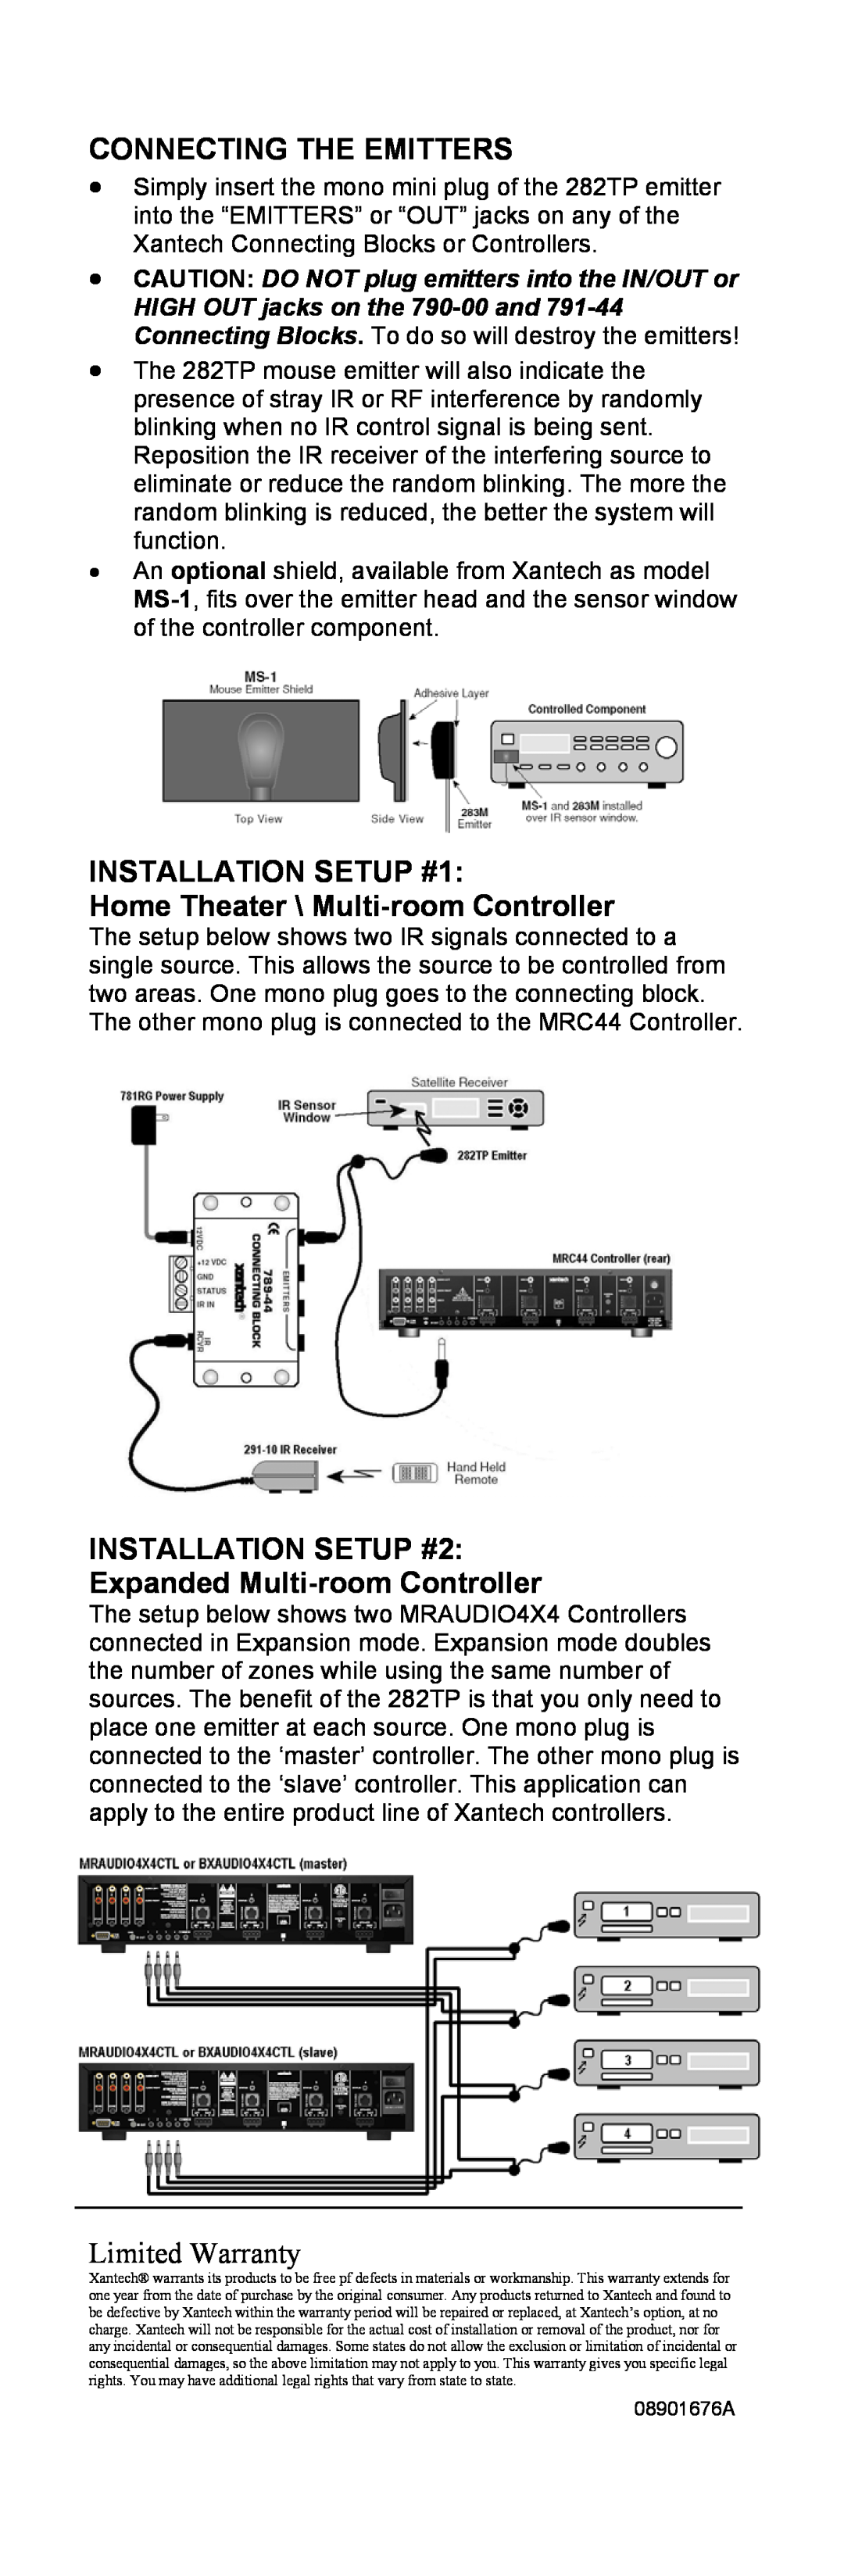 Xantech 282TP Connecting The Emitters, INSTALLATION SETUP #1 Home Theater \ Multi-room Controller, Limited Warranty 